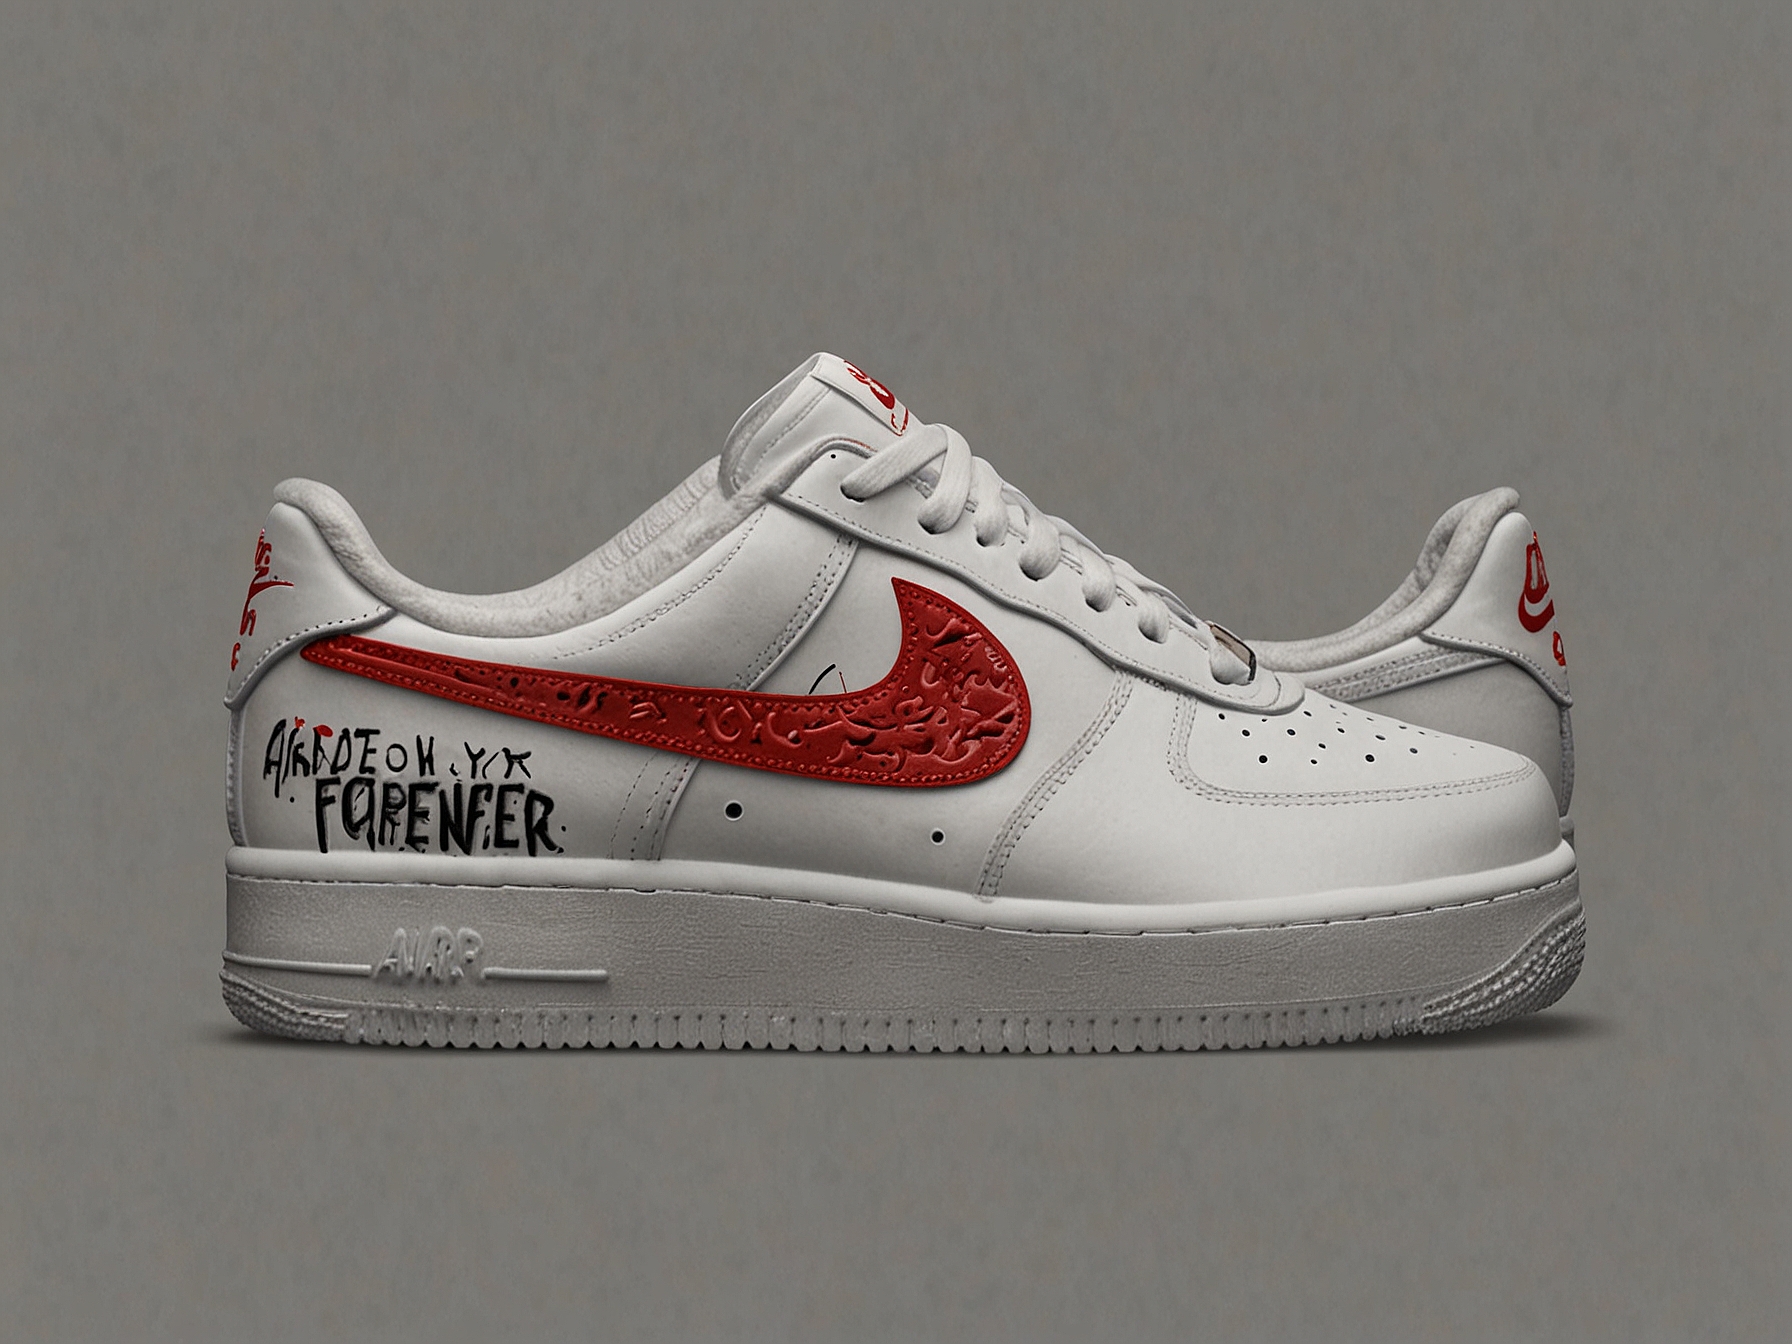 The heel of the NOCTA x Nike Air Force 1 Low, featuring an embossed 'Love You Forever' message and the unique embroidered logo, showcasing the detailed craftsmanship and thoughtful design of the sneaker.